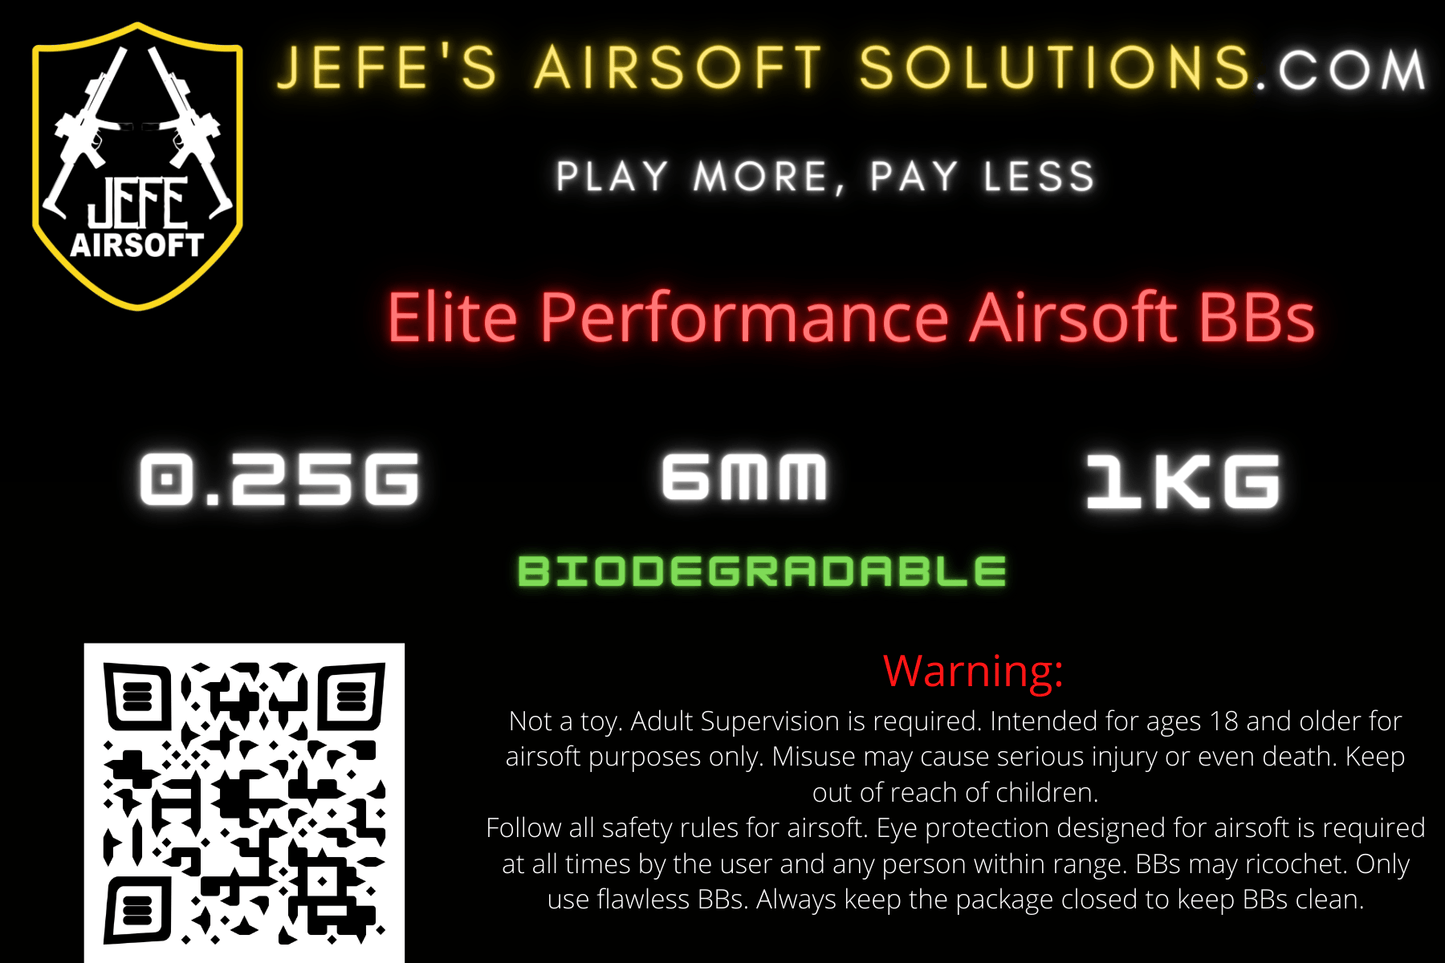 Elite Airsoft BBs Biodegradable - 0.25g 1kg - Jefe's Airsoft Solutionsbbslabor daysubscription